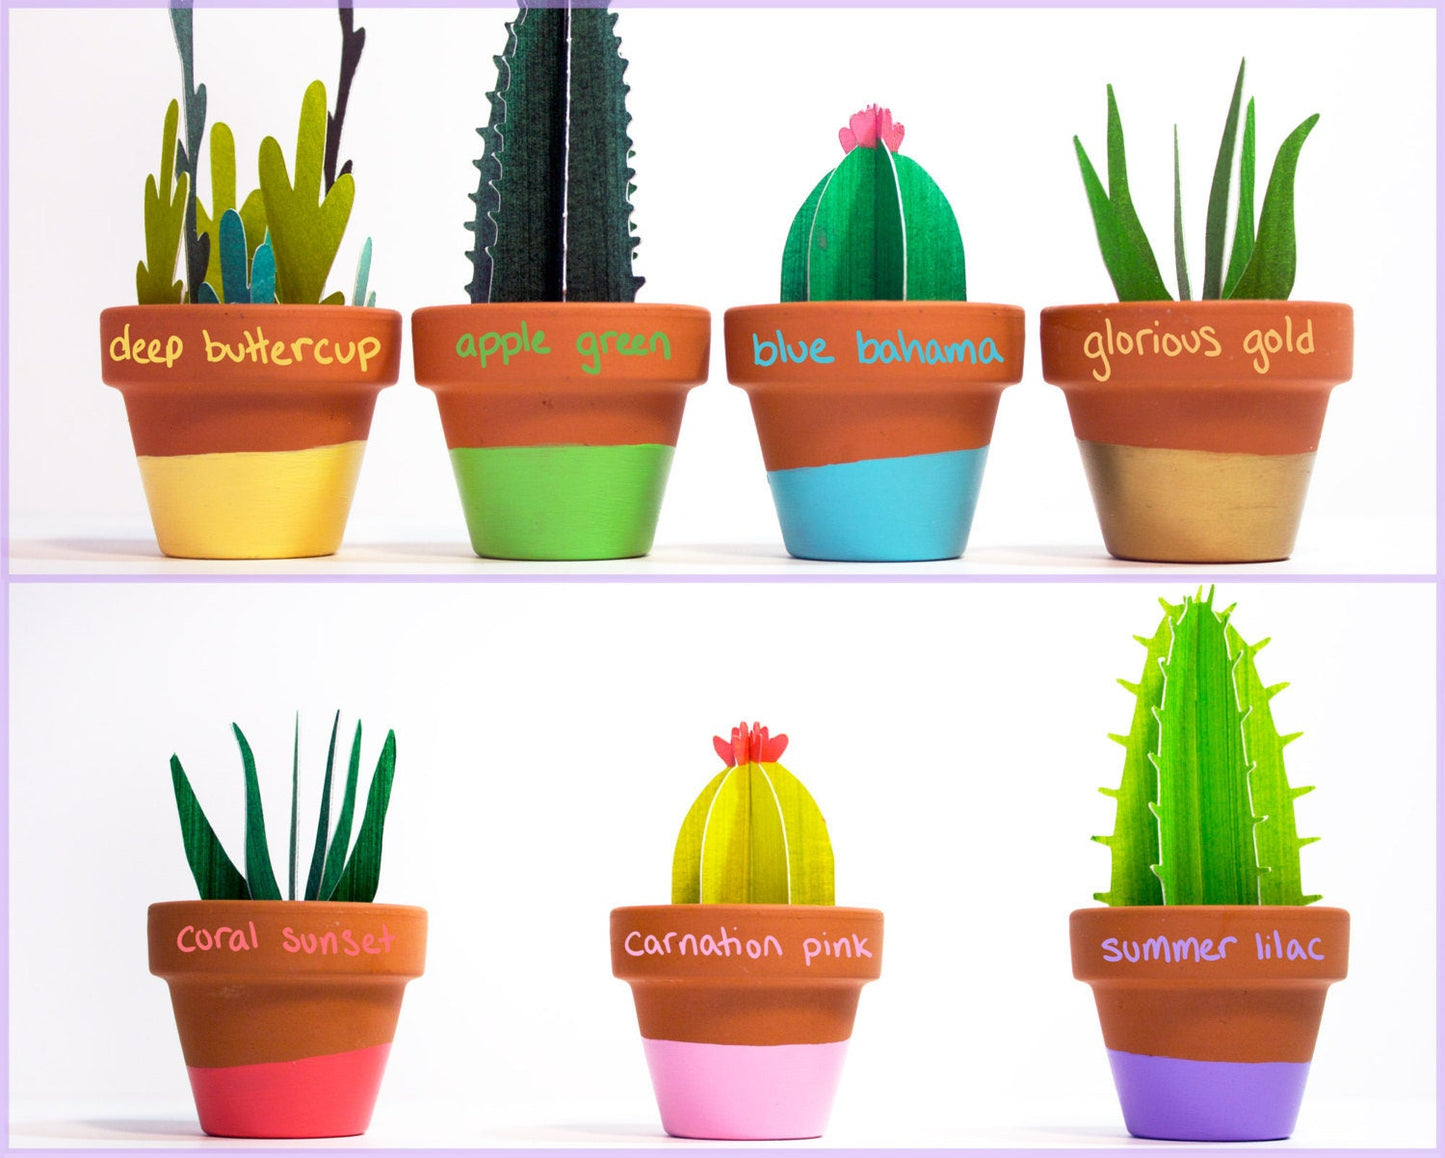 Cute 3D paper cacti in terracotta pots showing all color options for the base of the pots: deep buttercup, apple green, blue bahama, glorious gold, coral sunset, carnation pink, and summer lilac.